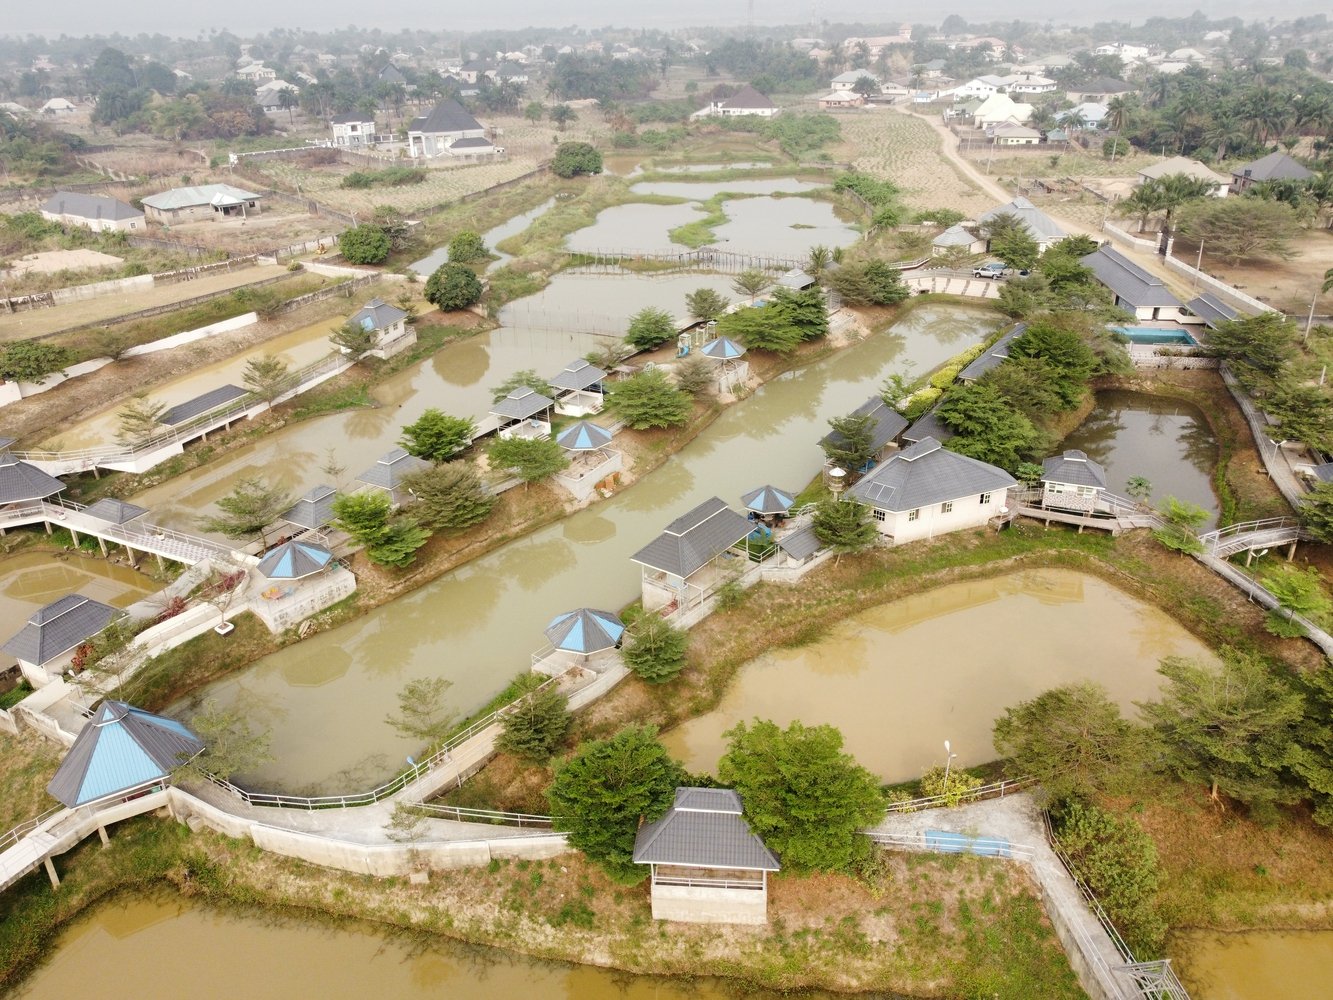 Aerial,View,Of,A,Fish,Farm,And,Resort,In,Nigeria